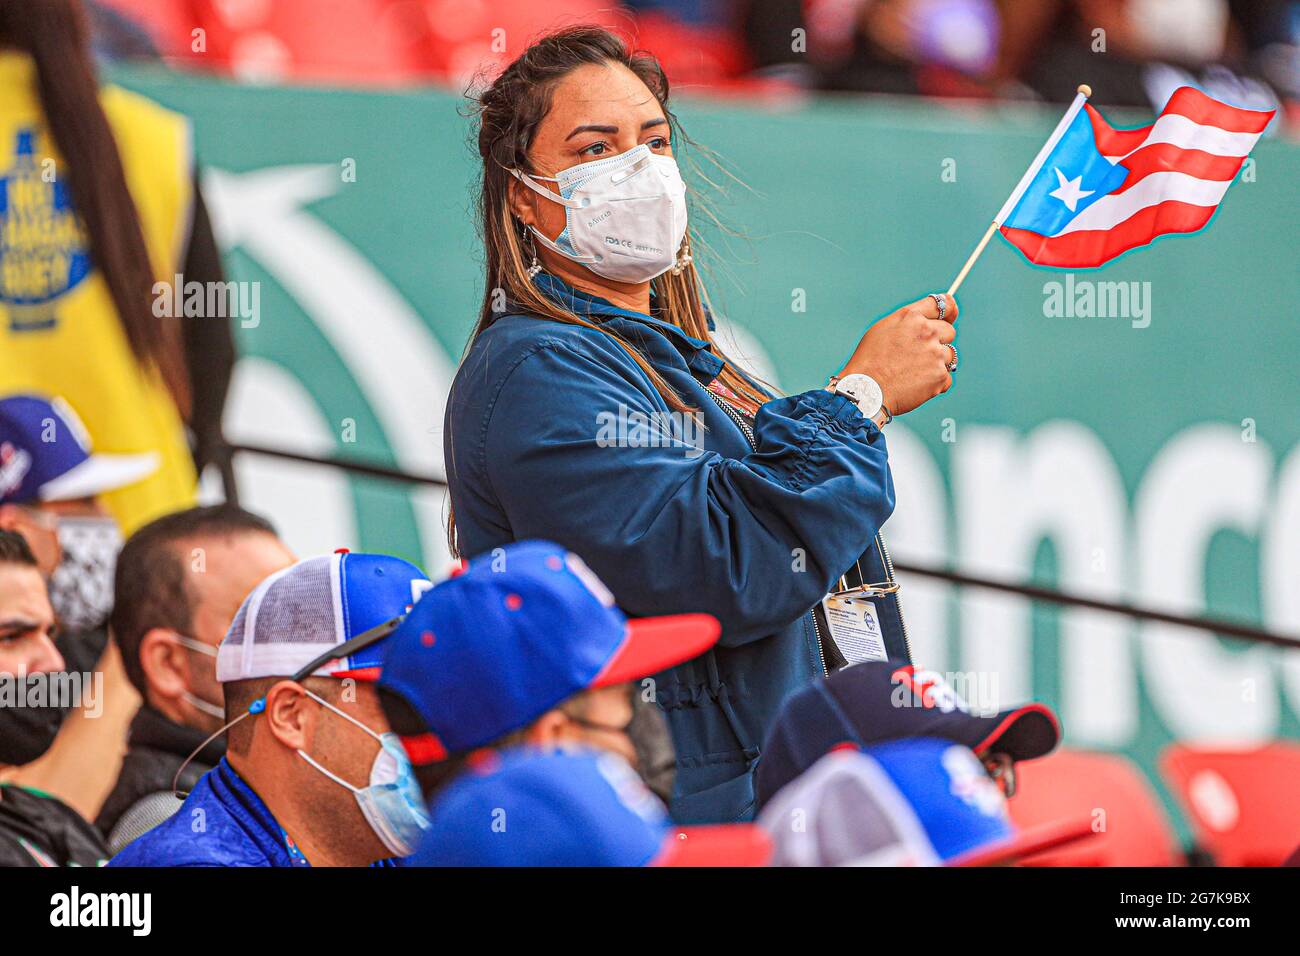 MAZATLAN, MEXICO - JANUARY 31: Puertorican Fans with masks due to Covid 19, during the game between Puerto Rico and Dominican Republic as part of Serie del Caribe 2021 at Teodoro Mariscal Stadium on January 31, 2021 in Mazatlan, Mexico. (Photo by Luis Gutierrez/Norte Photo/) Stock Photo